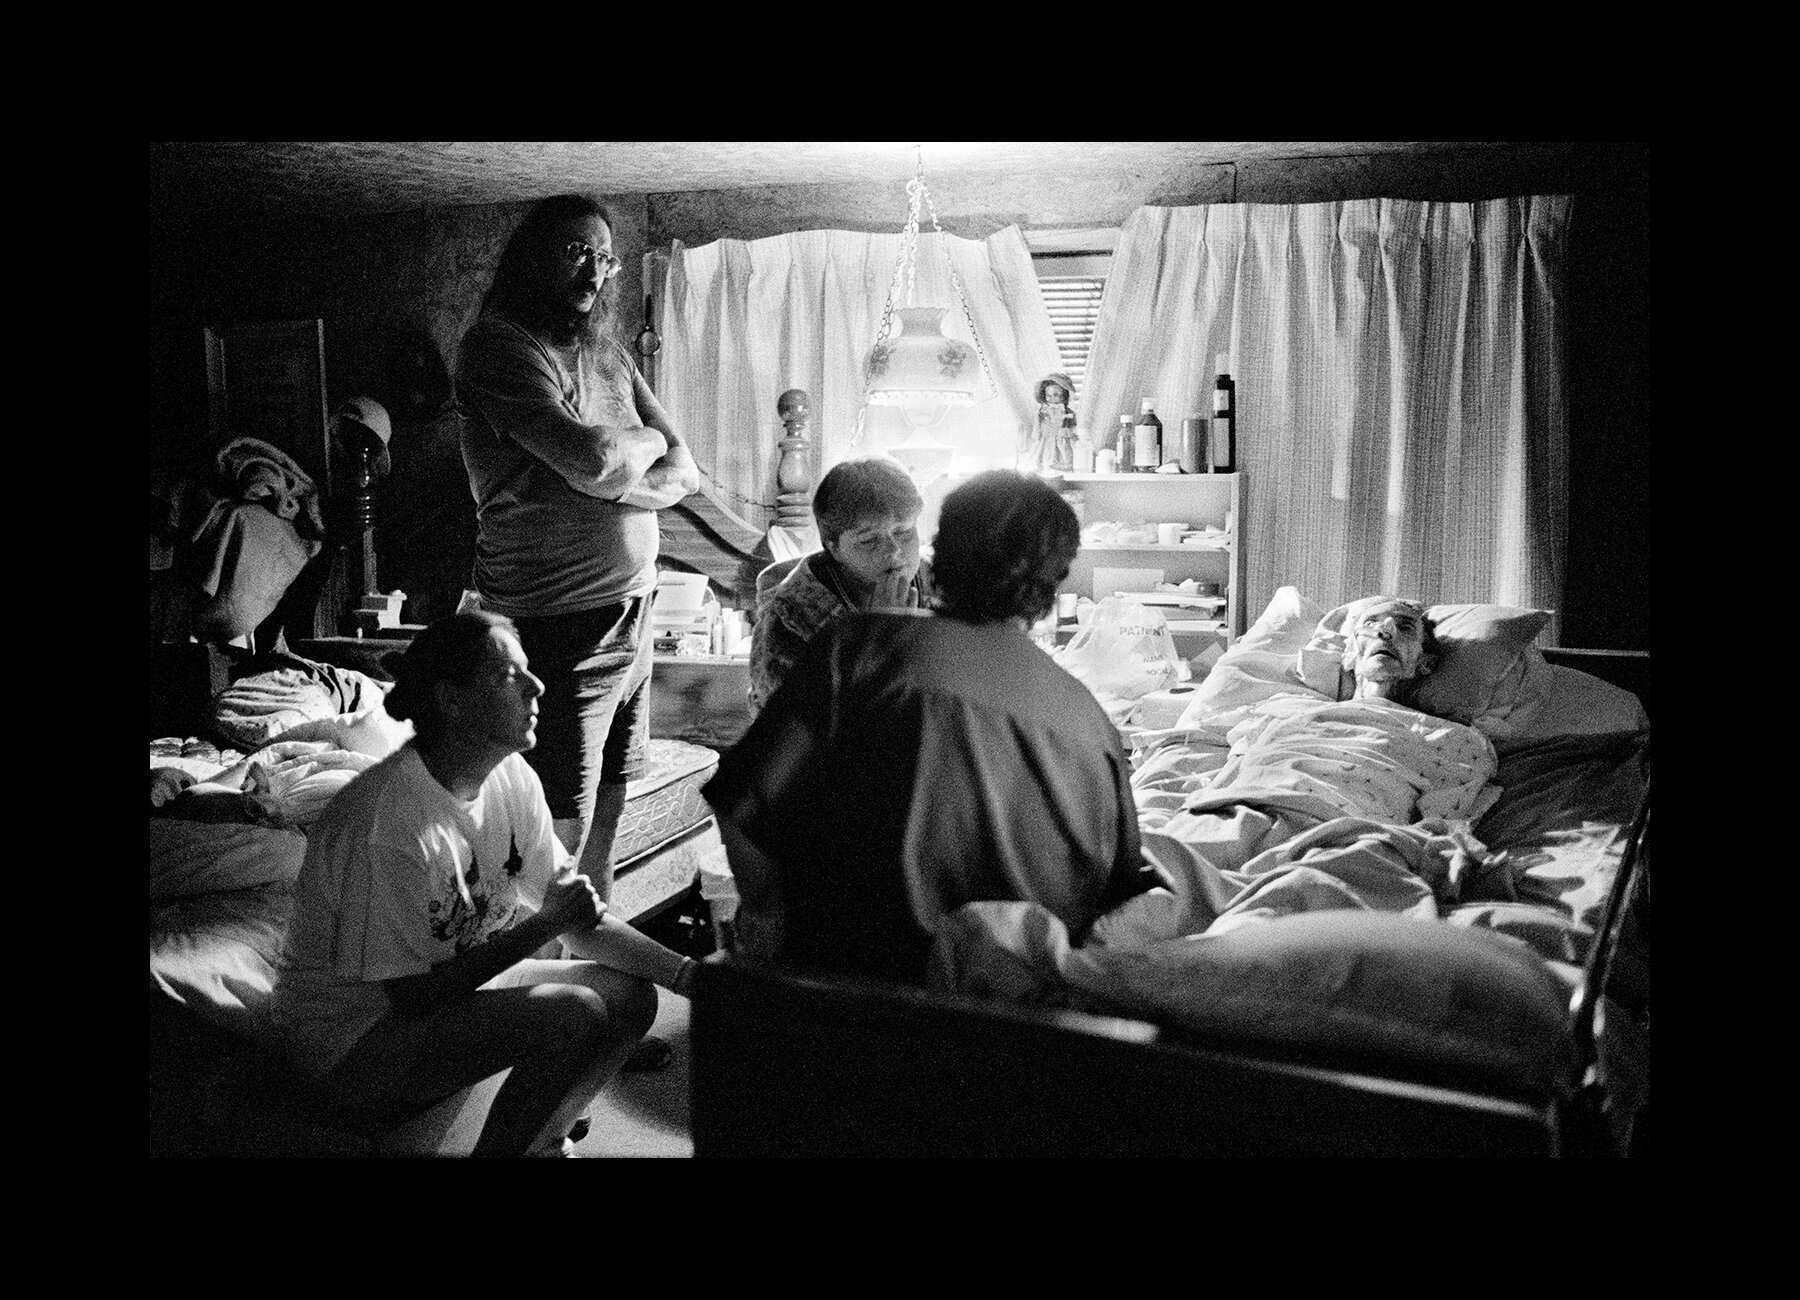  Back from the hospital, Vance Mayle spends his final hours in his own home, surrounded by family and friends in Grafton, West Virginia. 2000 